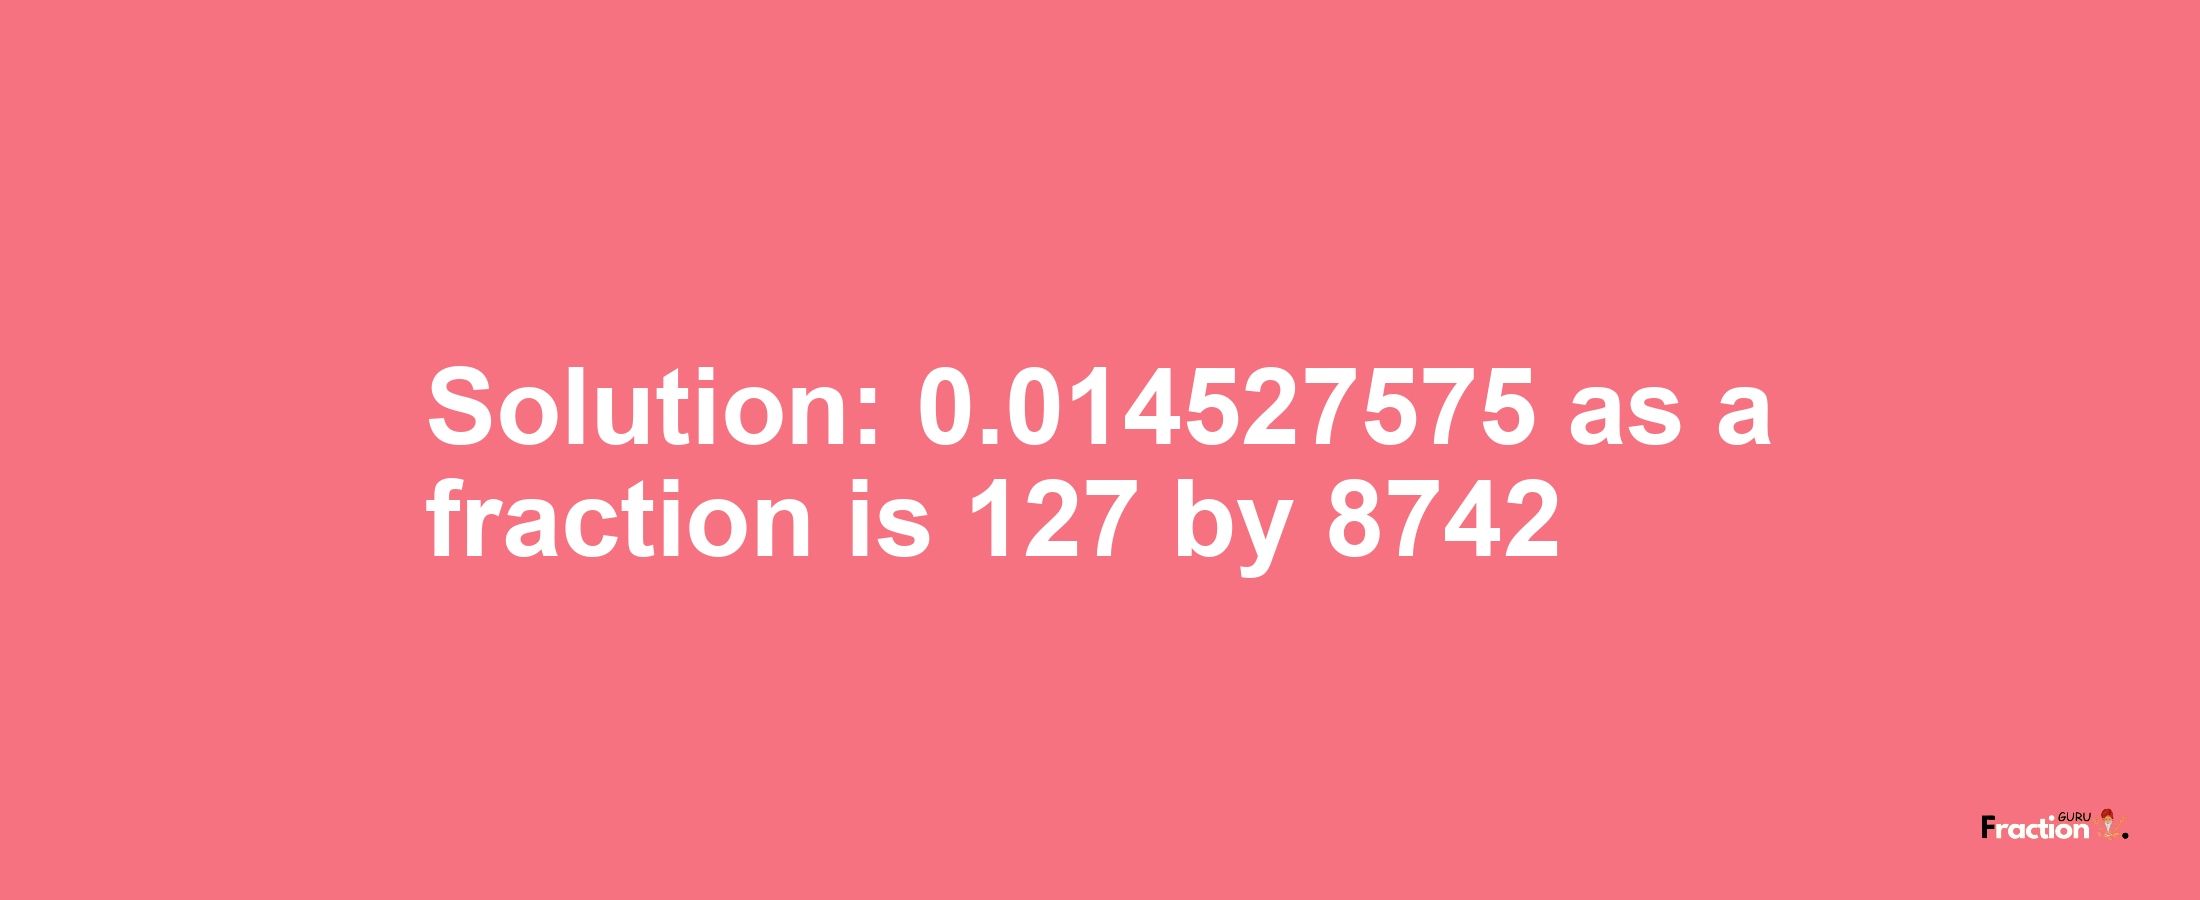 Solution:0.014527575 as a fraction is 127/8742